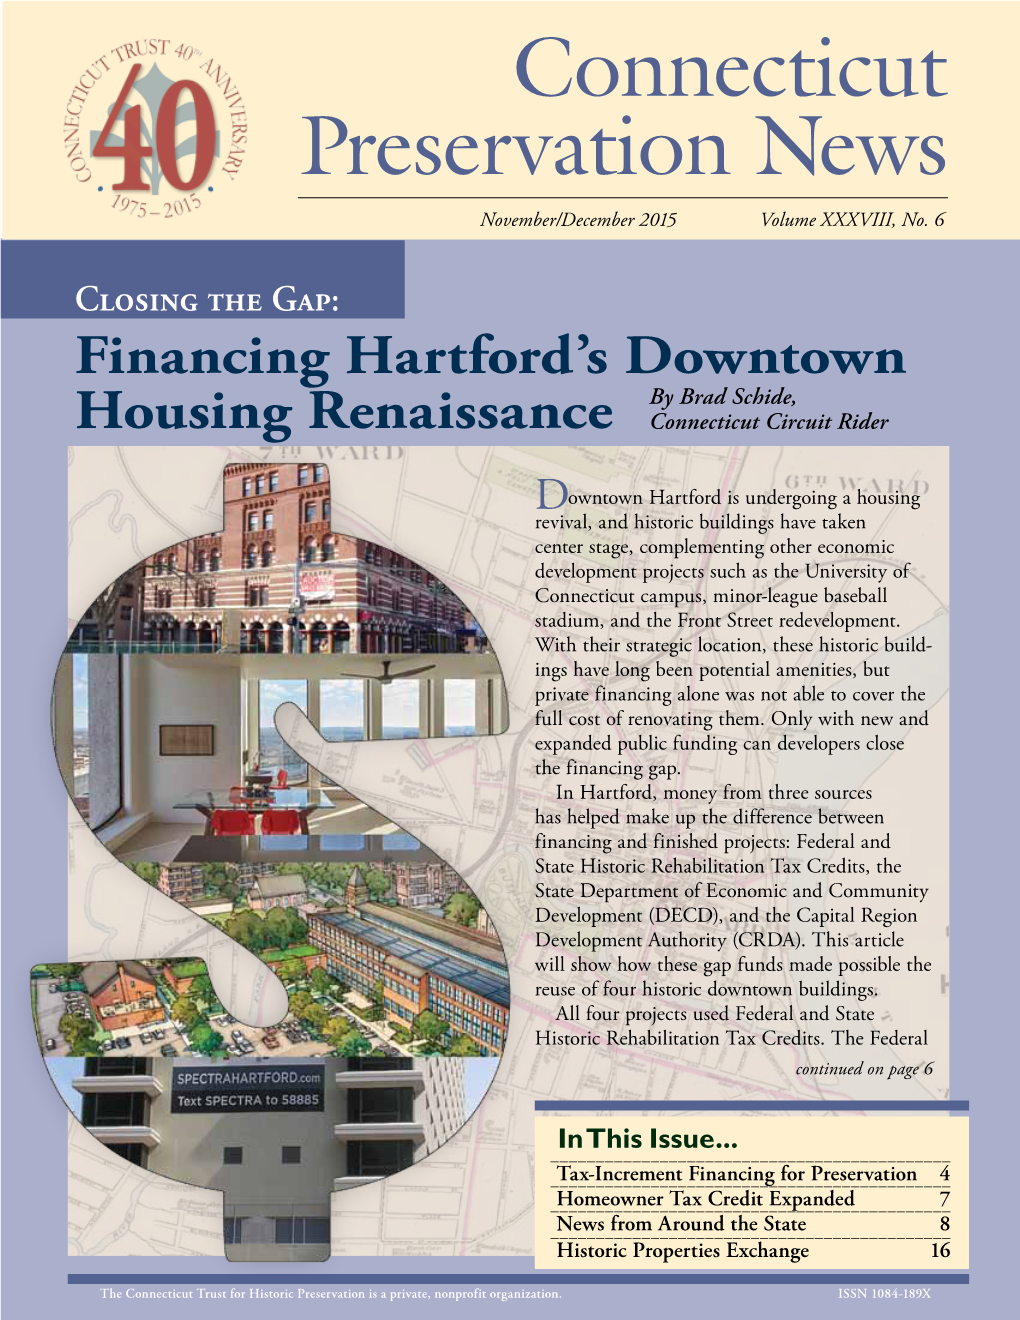 Tax Increment Financing: an Improved Revitalization Tool by Renée Tribert, Project Manager, Making Places